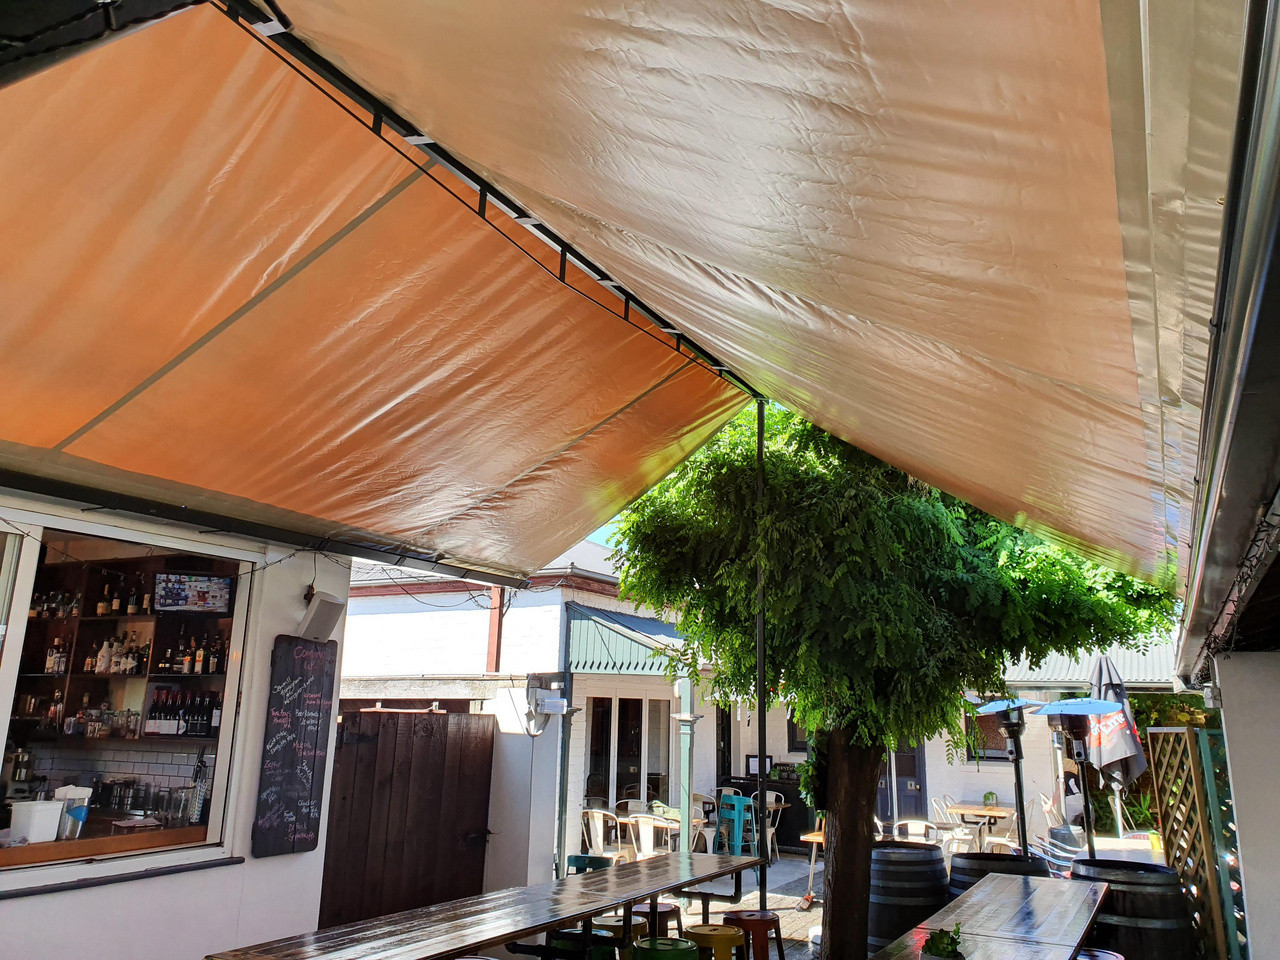 Check out the newly installed Shade Sail by Otago Engineering